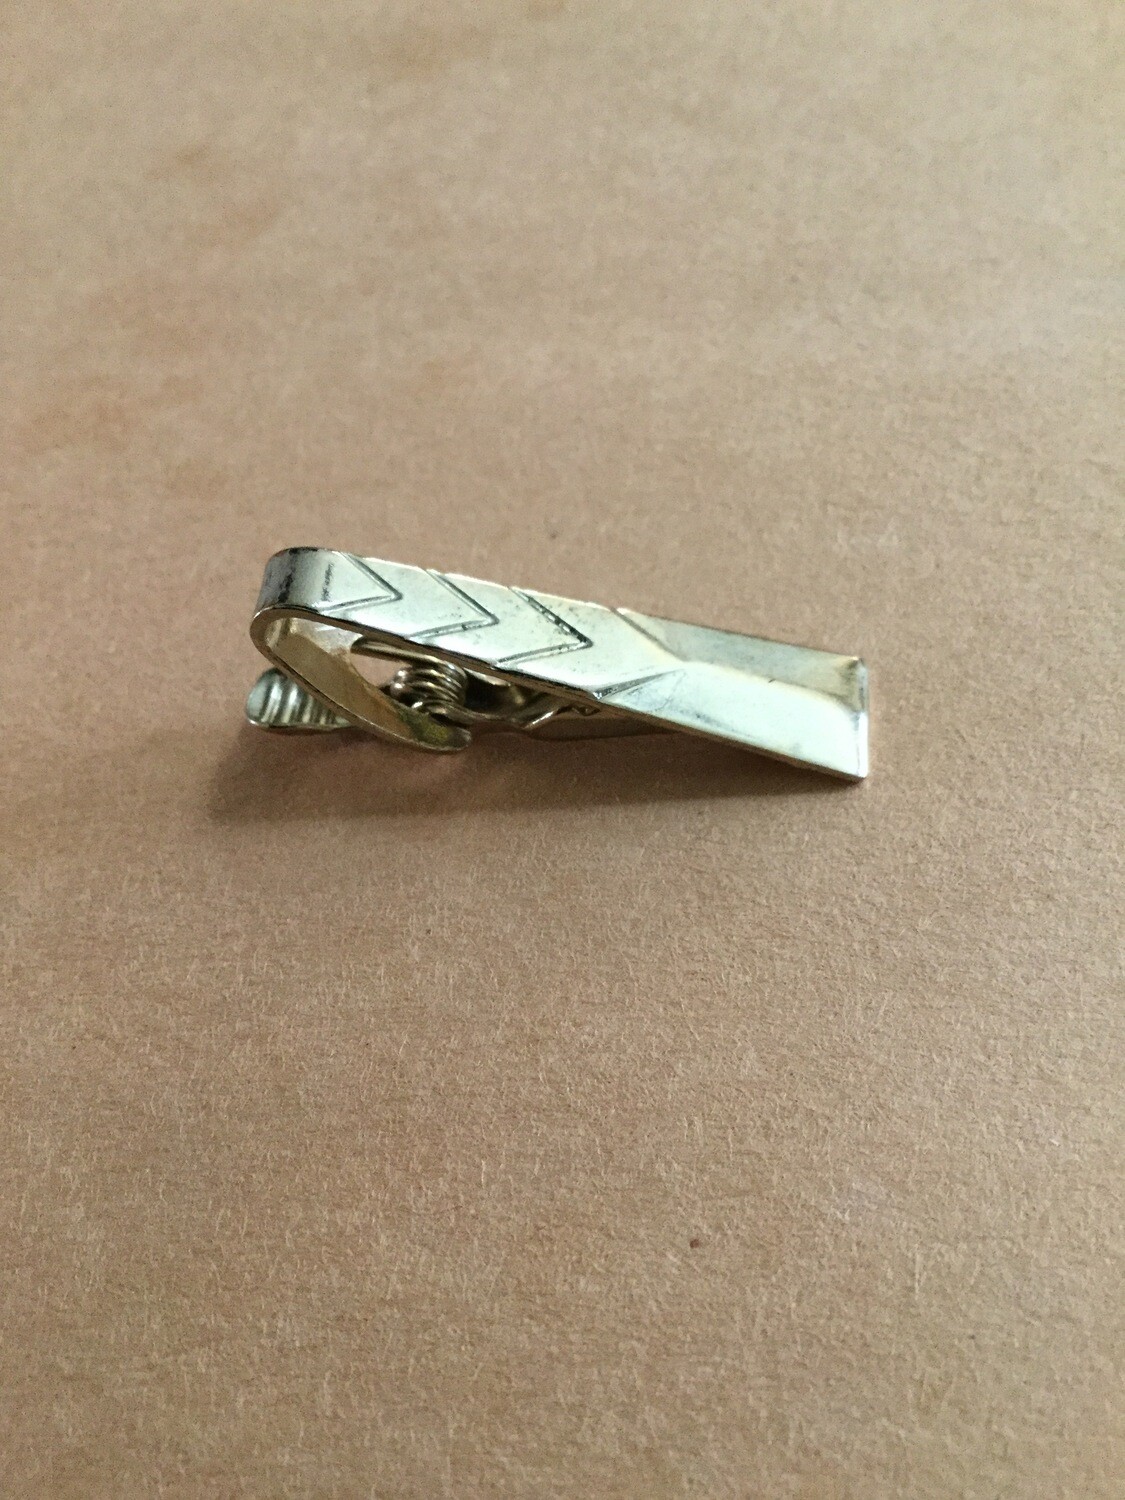 Tie Clip 3 of 4, Anointing of Strength and Stamina, to Endure and Overcome through all